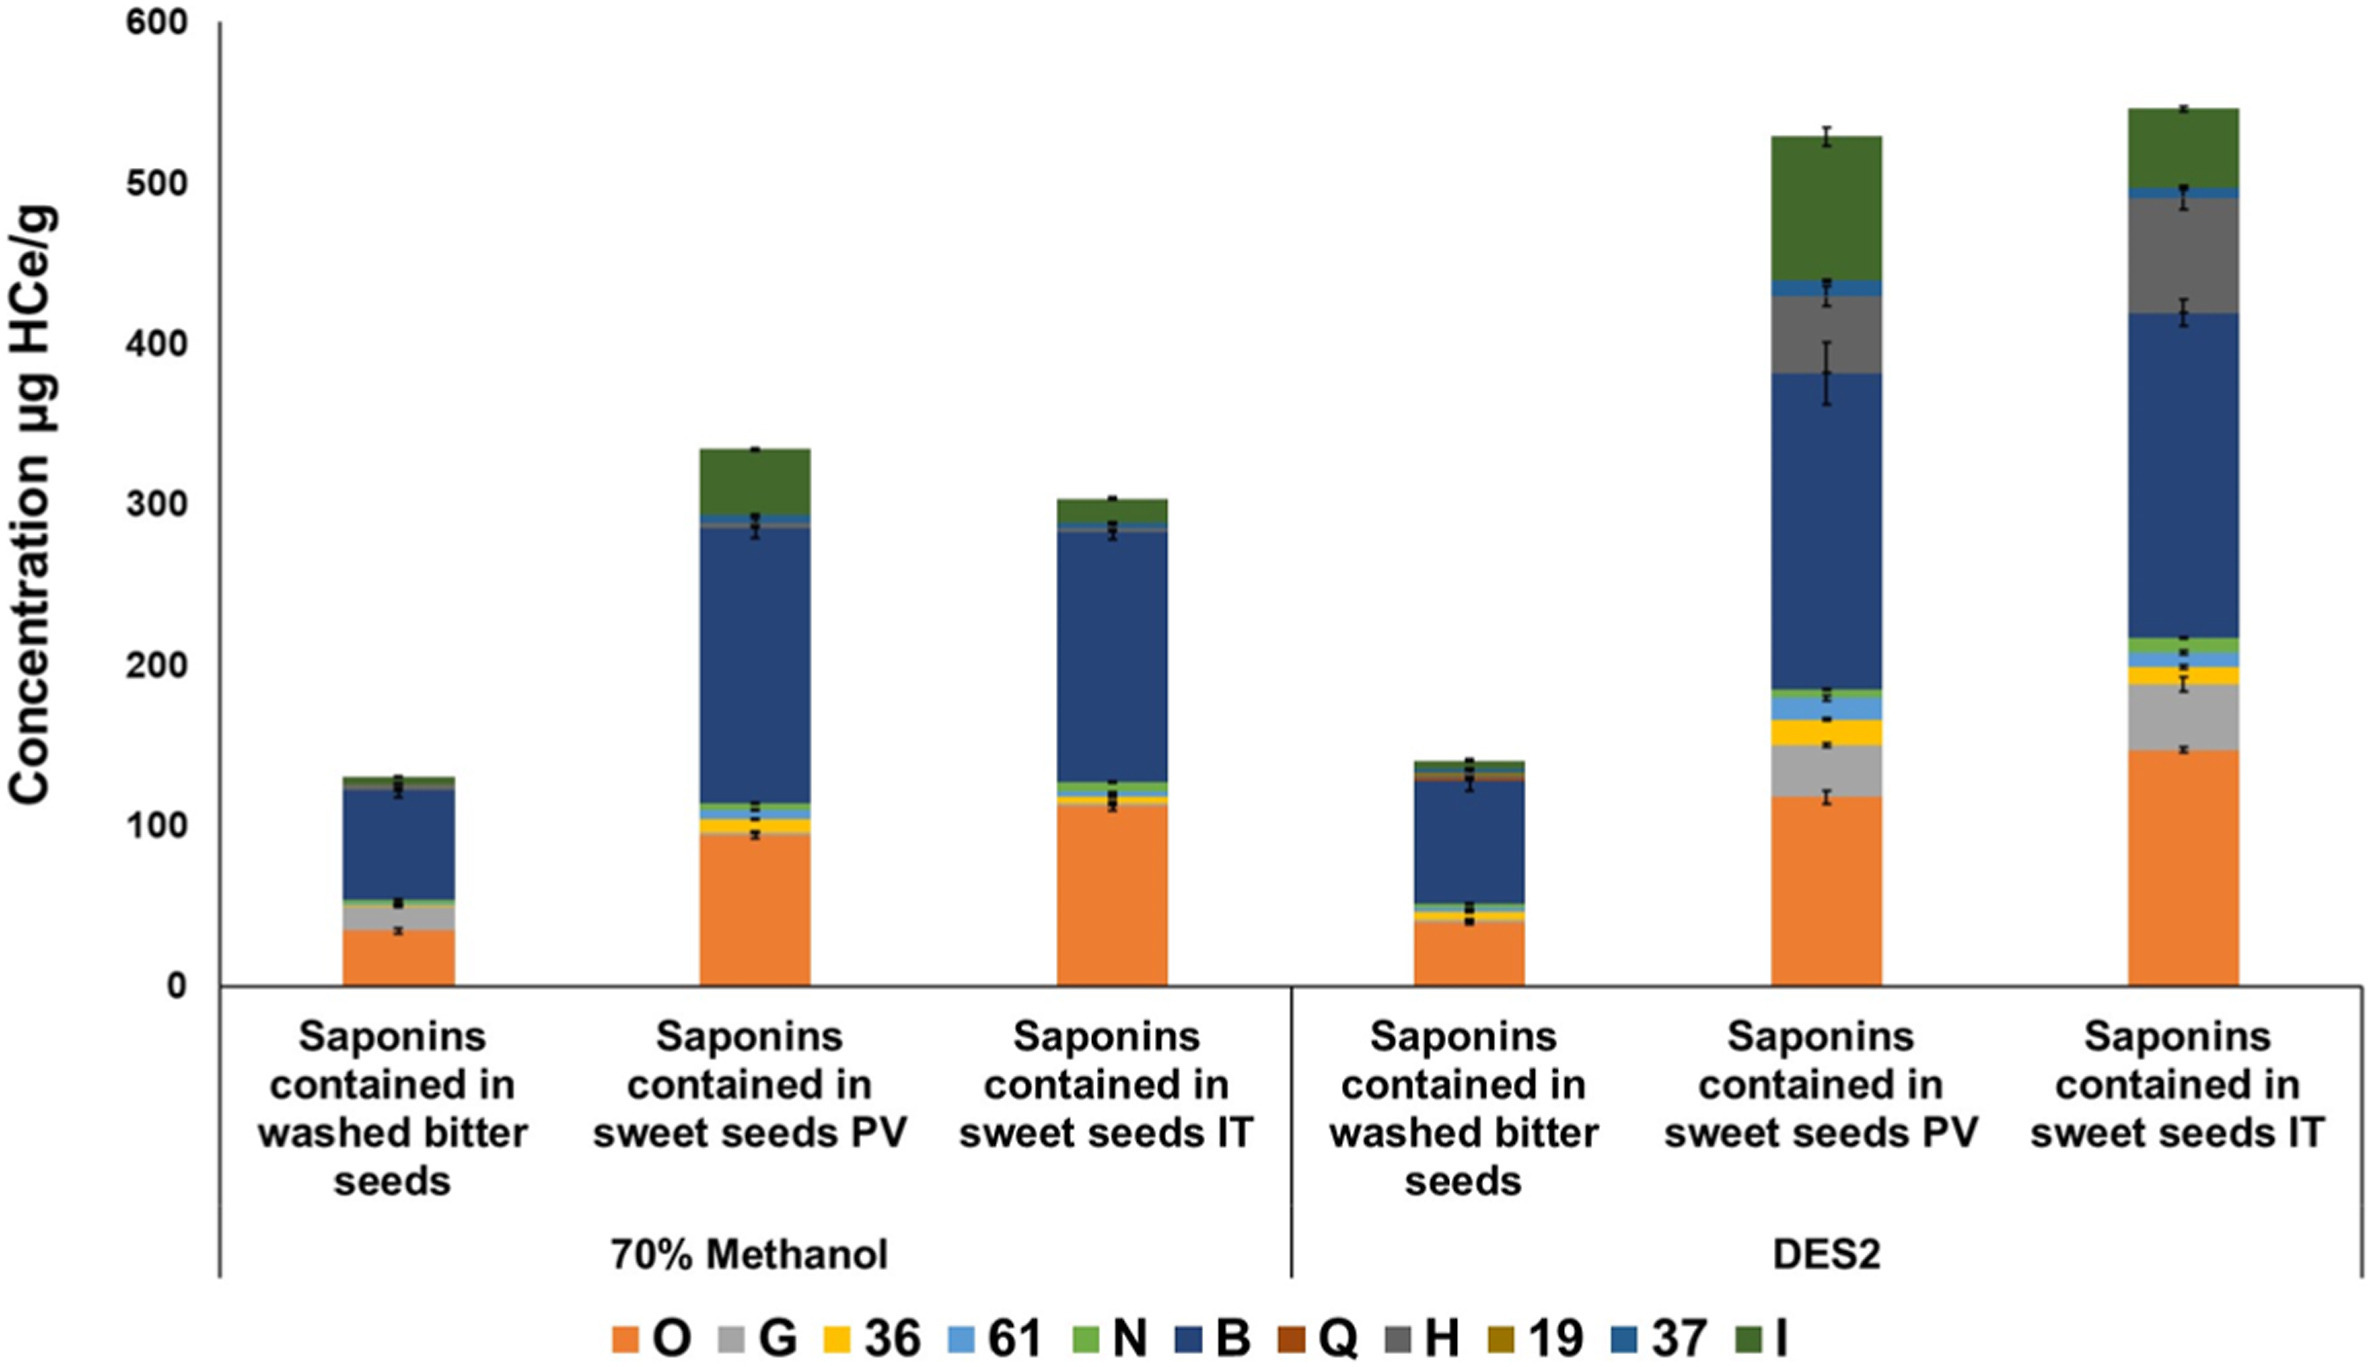 Relative amounts of saponins identified in the samples: water-washed bitter seeds, sweet seeds PV, and sweet seeds IT, extracted either with 70% methanol or DES2 (choline chloride - glycerol - water at a molar ratio 1:2:1). The solvent/sample ratio is 20:1 (w/w) to all samples. The structures of the different saponins are described in Table 1 n = 3 technical replicates.